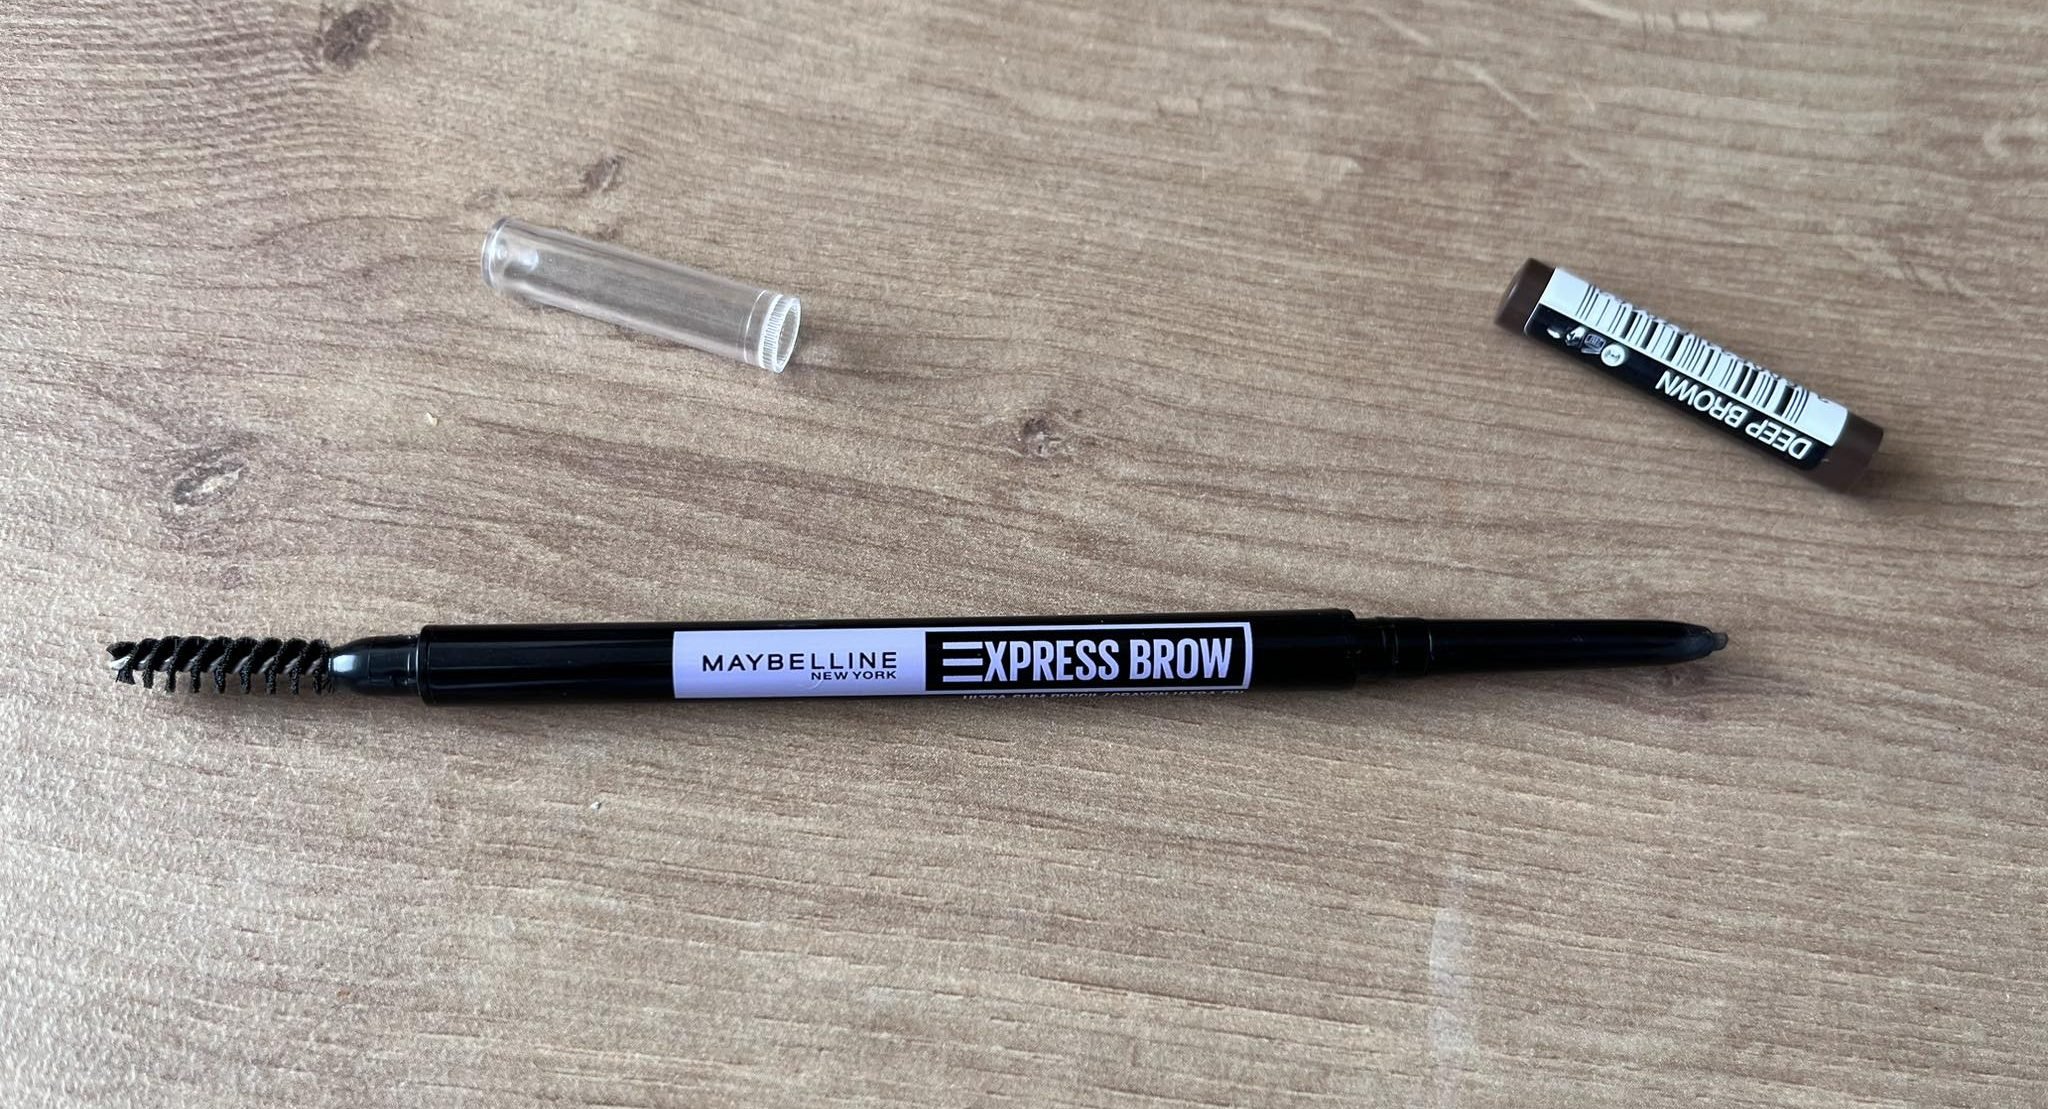 Maybelline Xpress brow